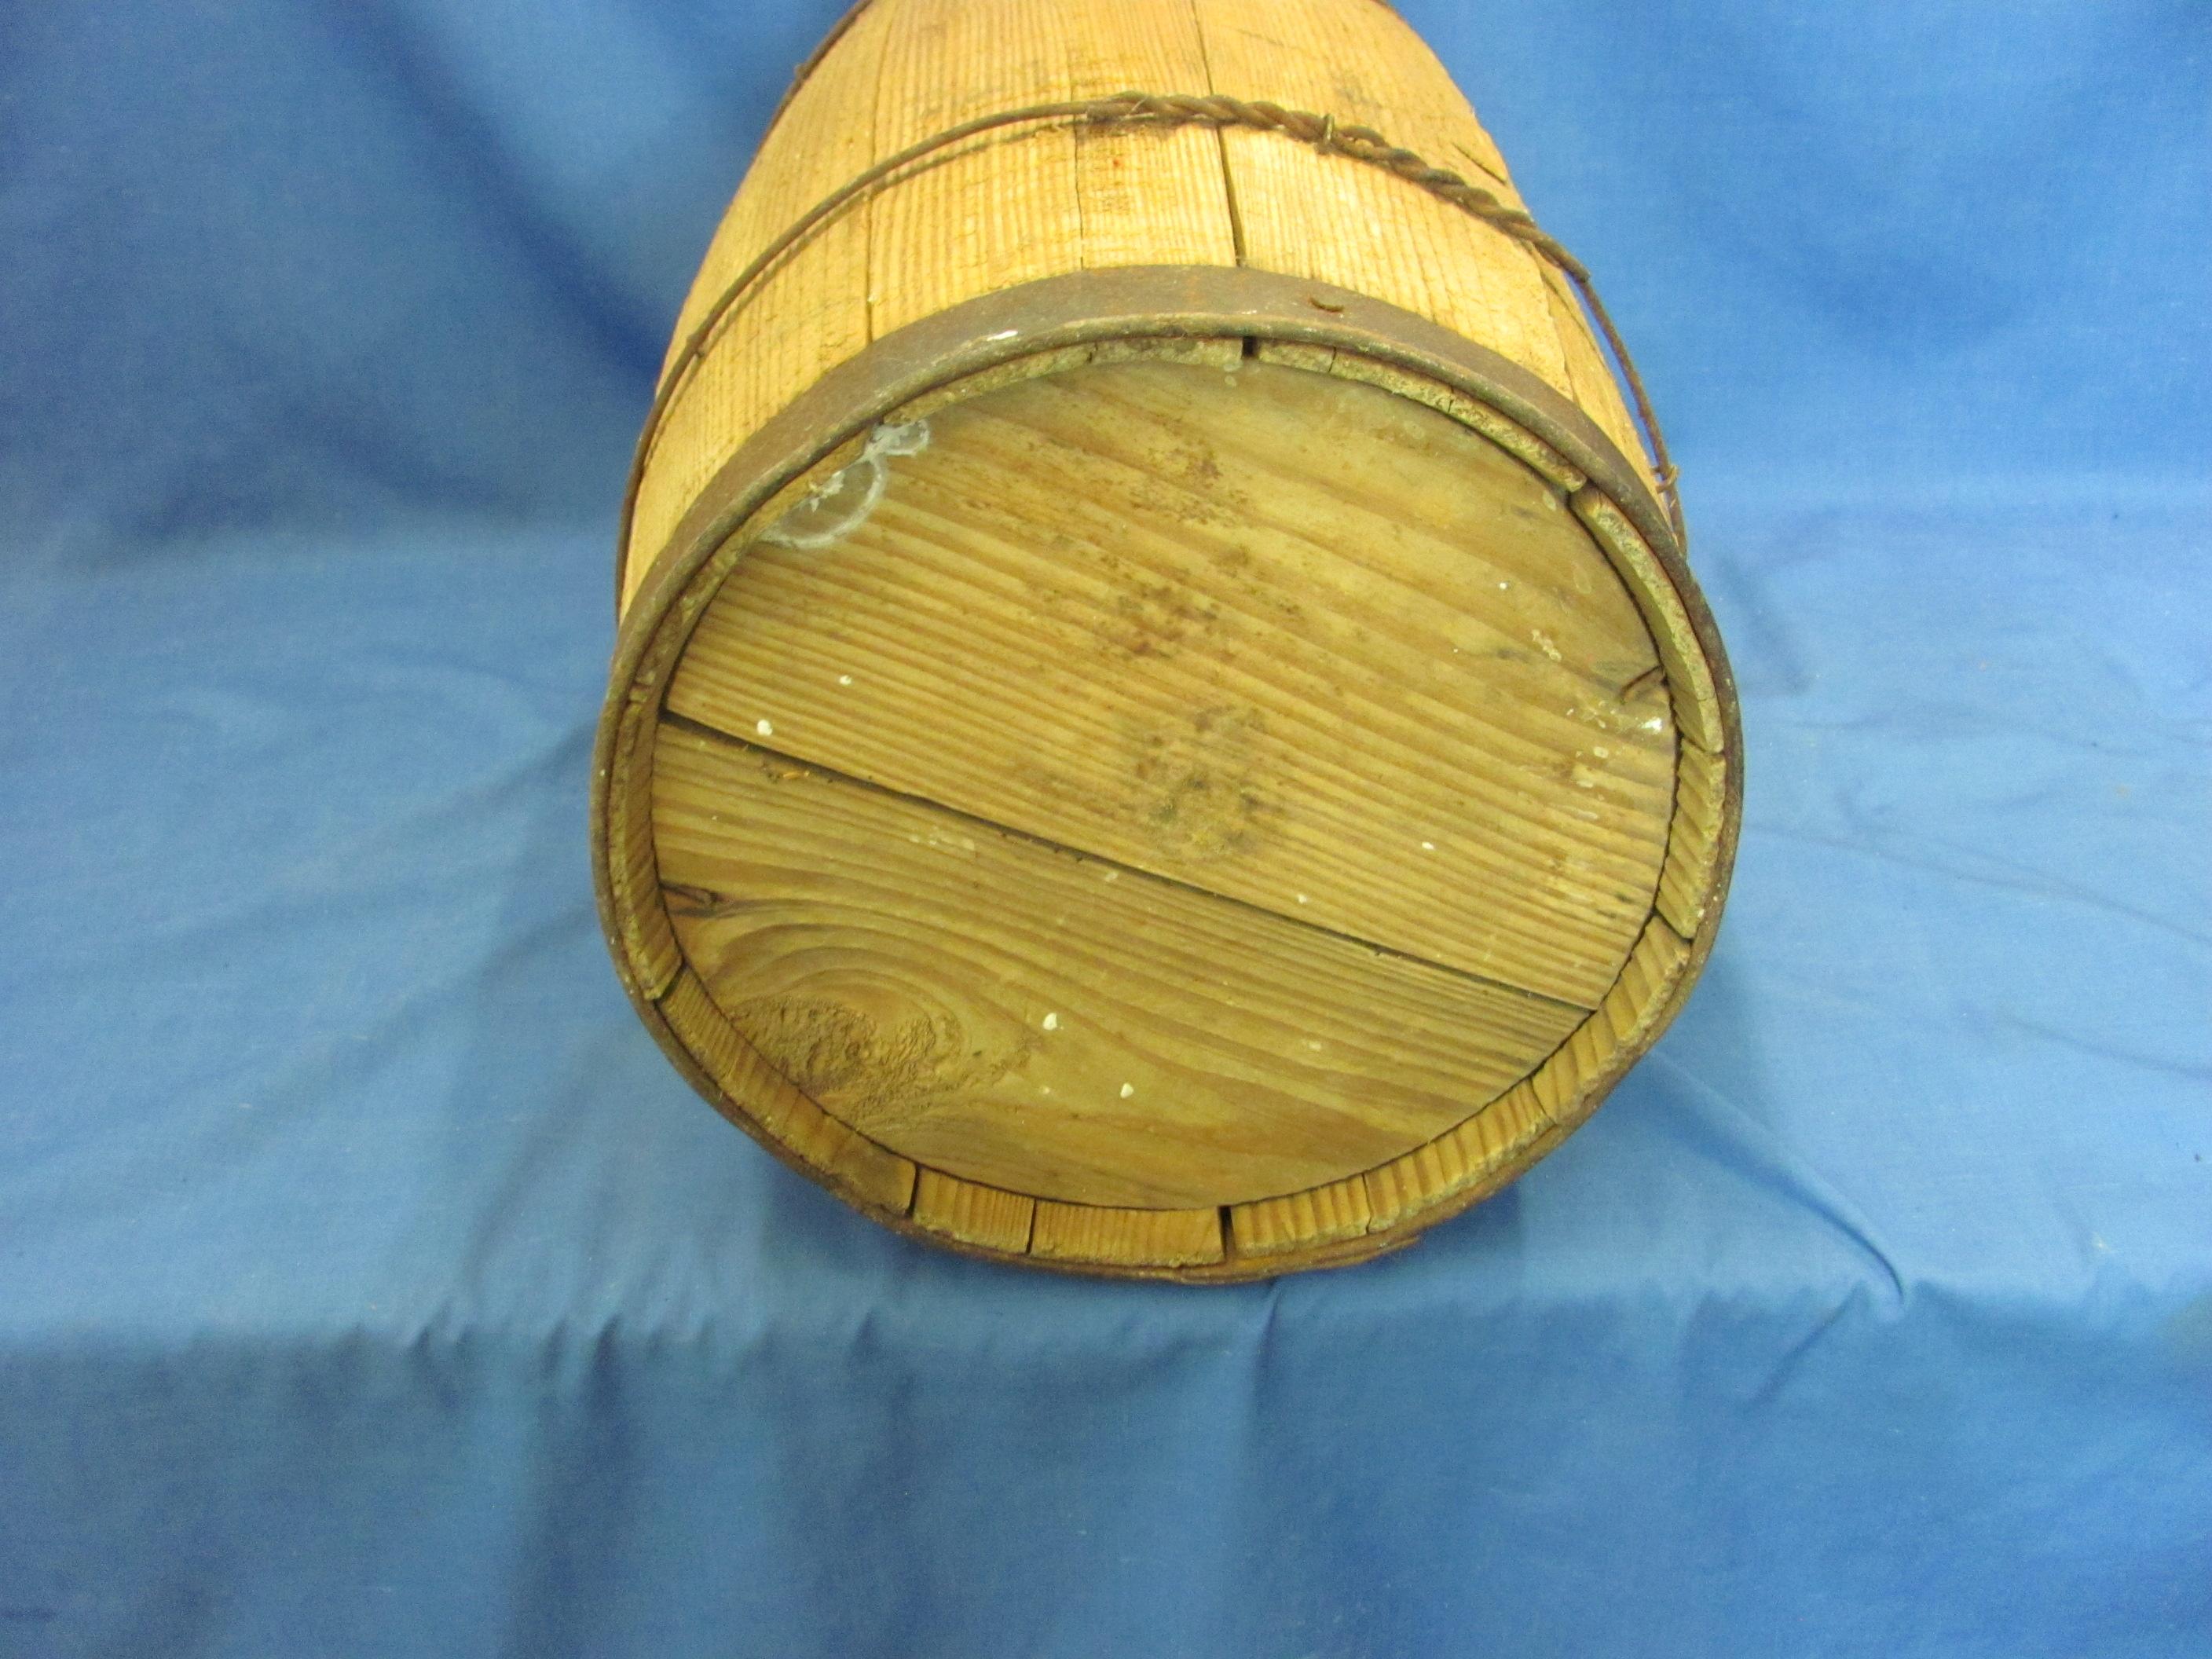 Wood Nail Keg With Metal Straps/Wire – 18 1/4” T – Wood Slabs Are Loose